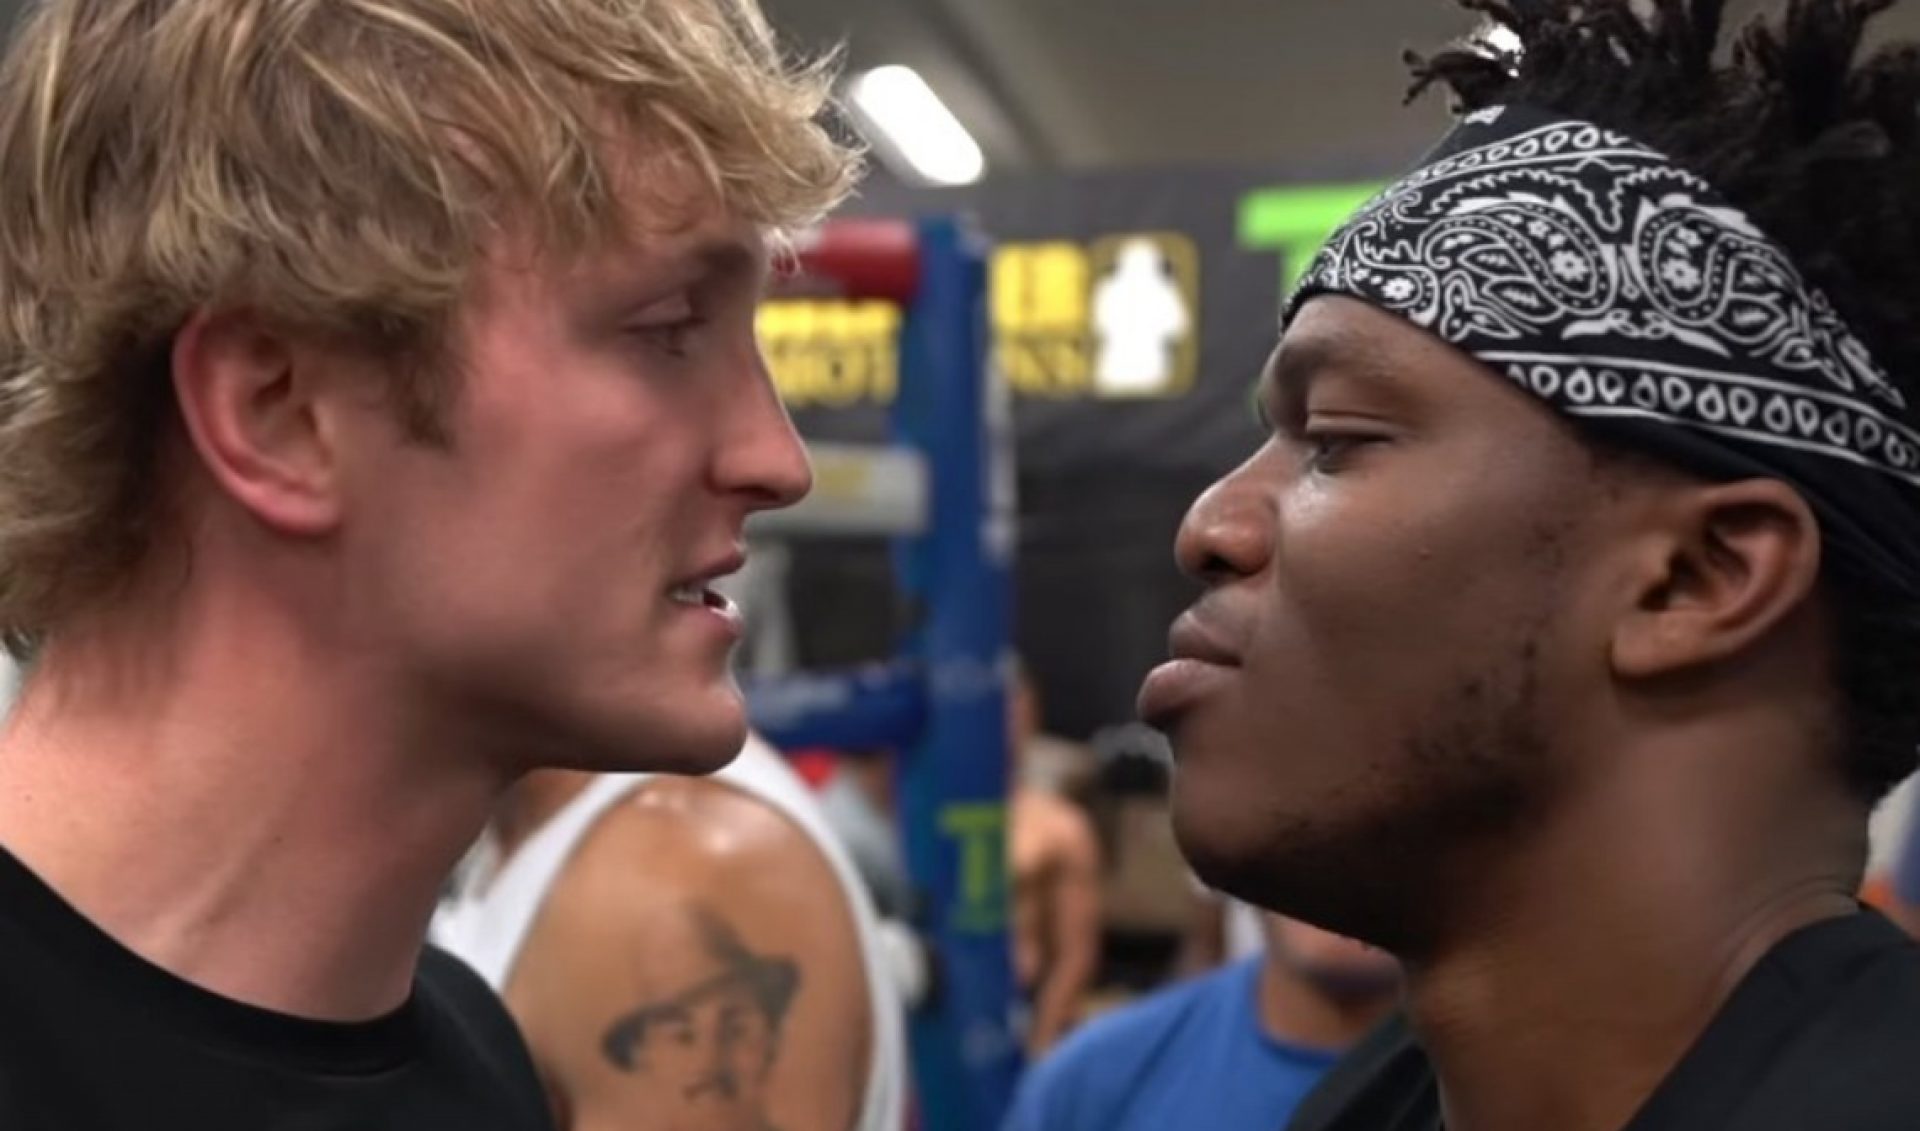 Logan Paul And KSI Have Launched A Pay-Per-View YouTube Channel Dedicated To Their Upcoming Boxing Match